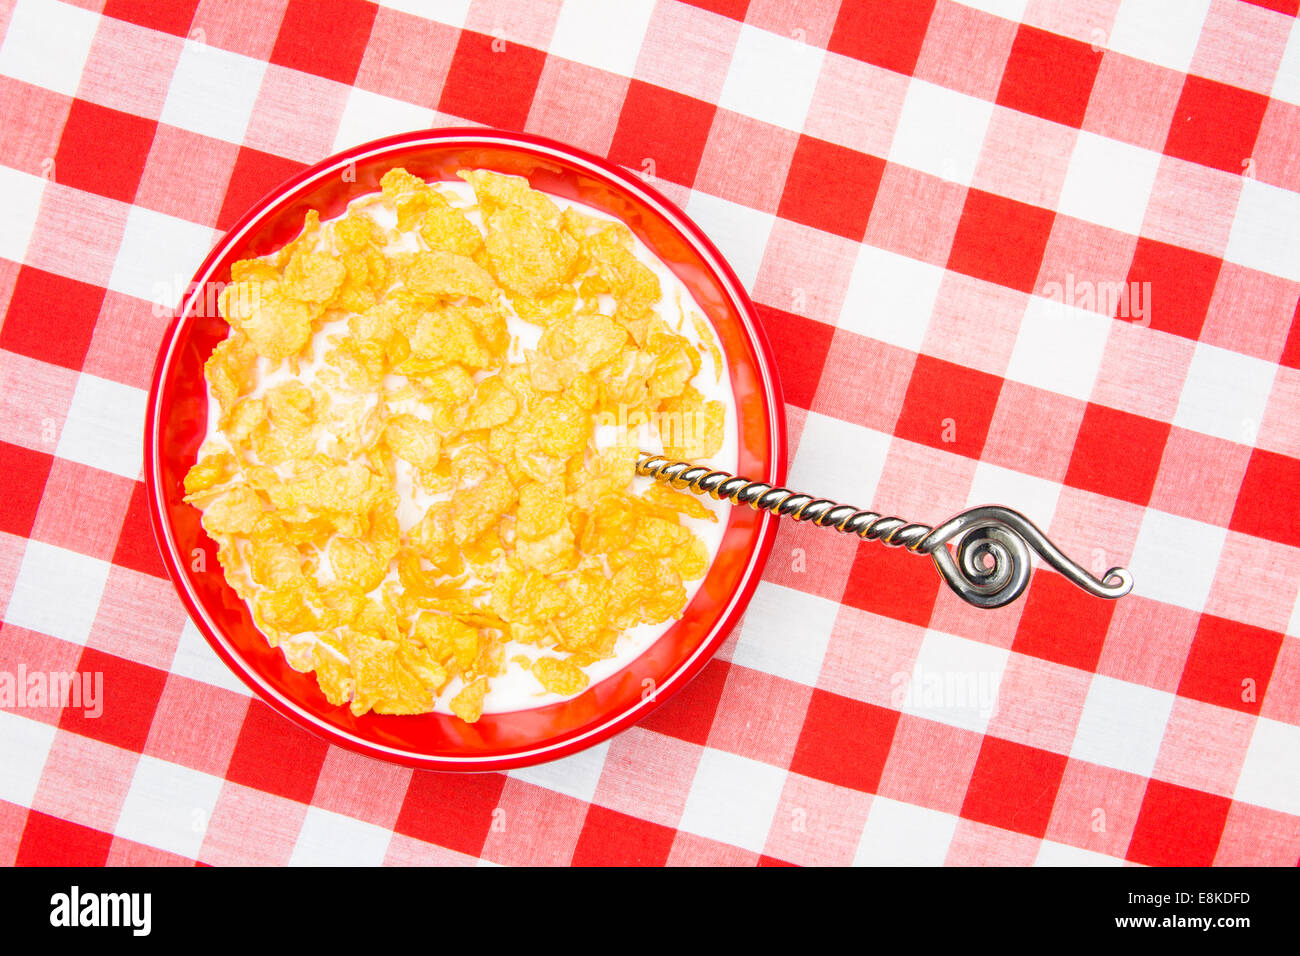 A red bowl of cornflakes and milk on a classic, red, checkered tablecloth ready as a breakfast meal. Stock Photo